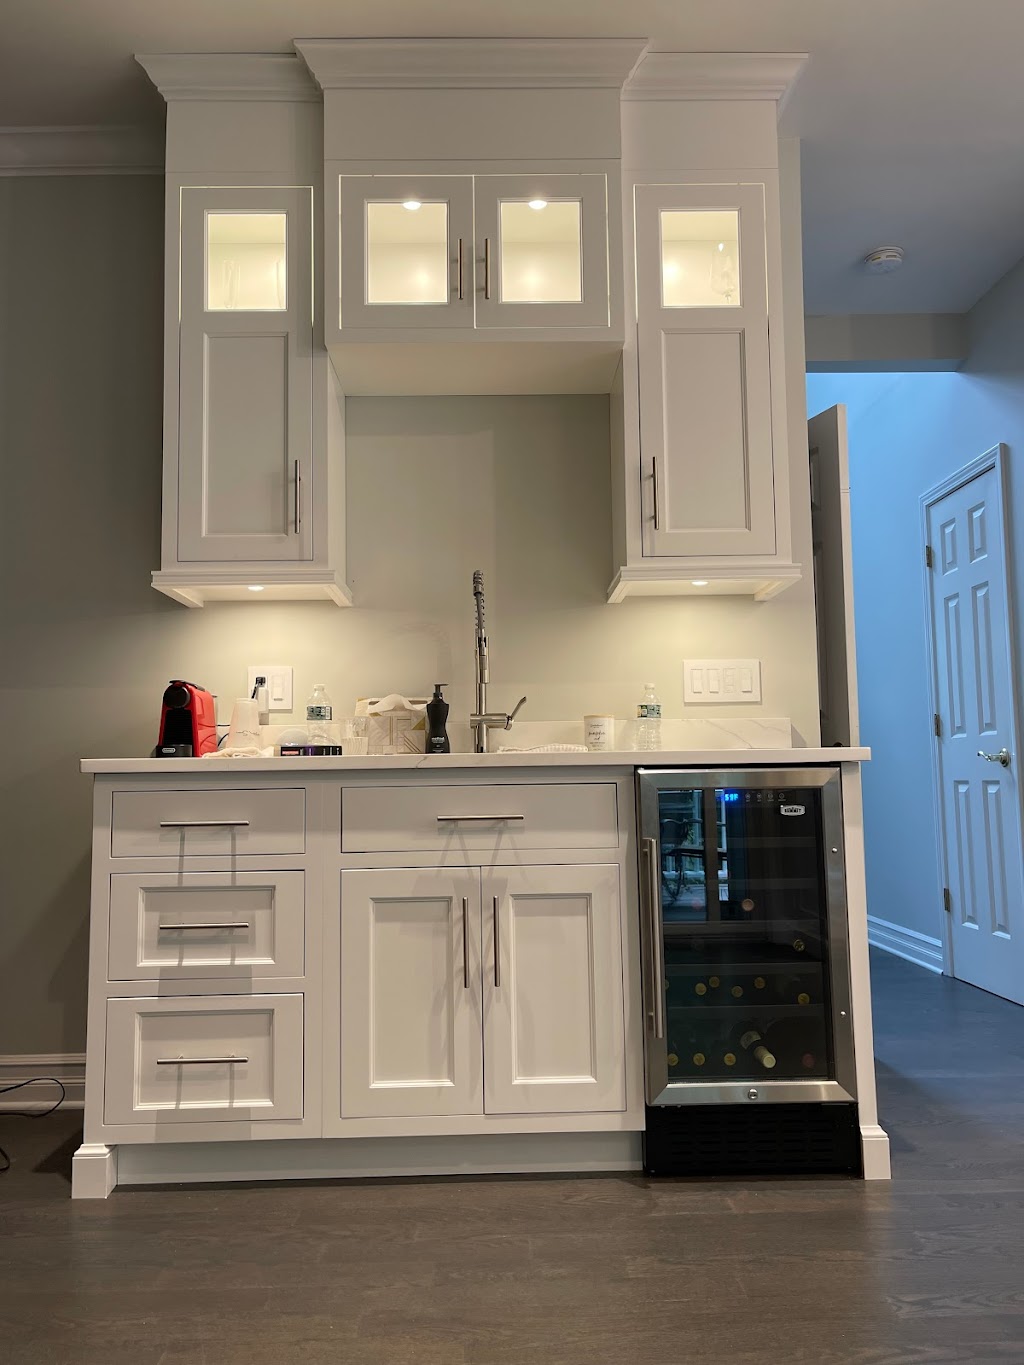 Castle Kitchen and Bath Cabinets | 1402 Castle Hill Ave, Bronx, NY 10462 | Phone: (718) 409-1935